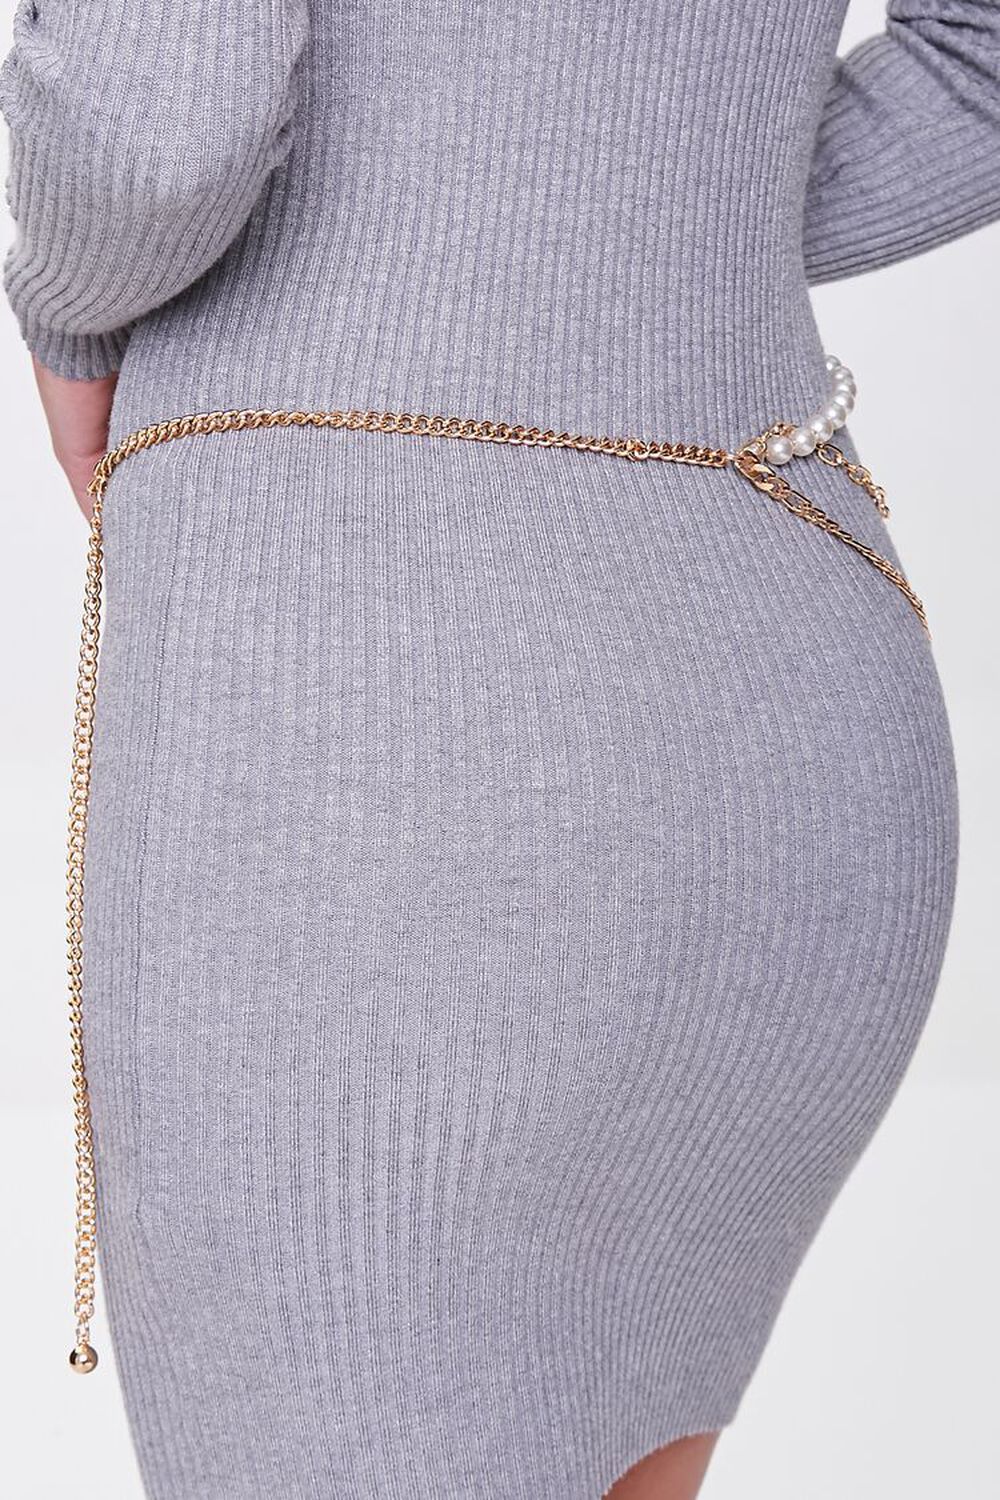 GOLD Faux Pearl Layered Chain Hip Belt, image 3